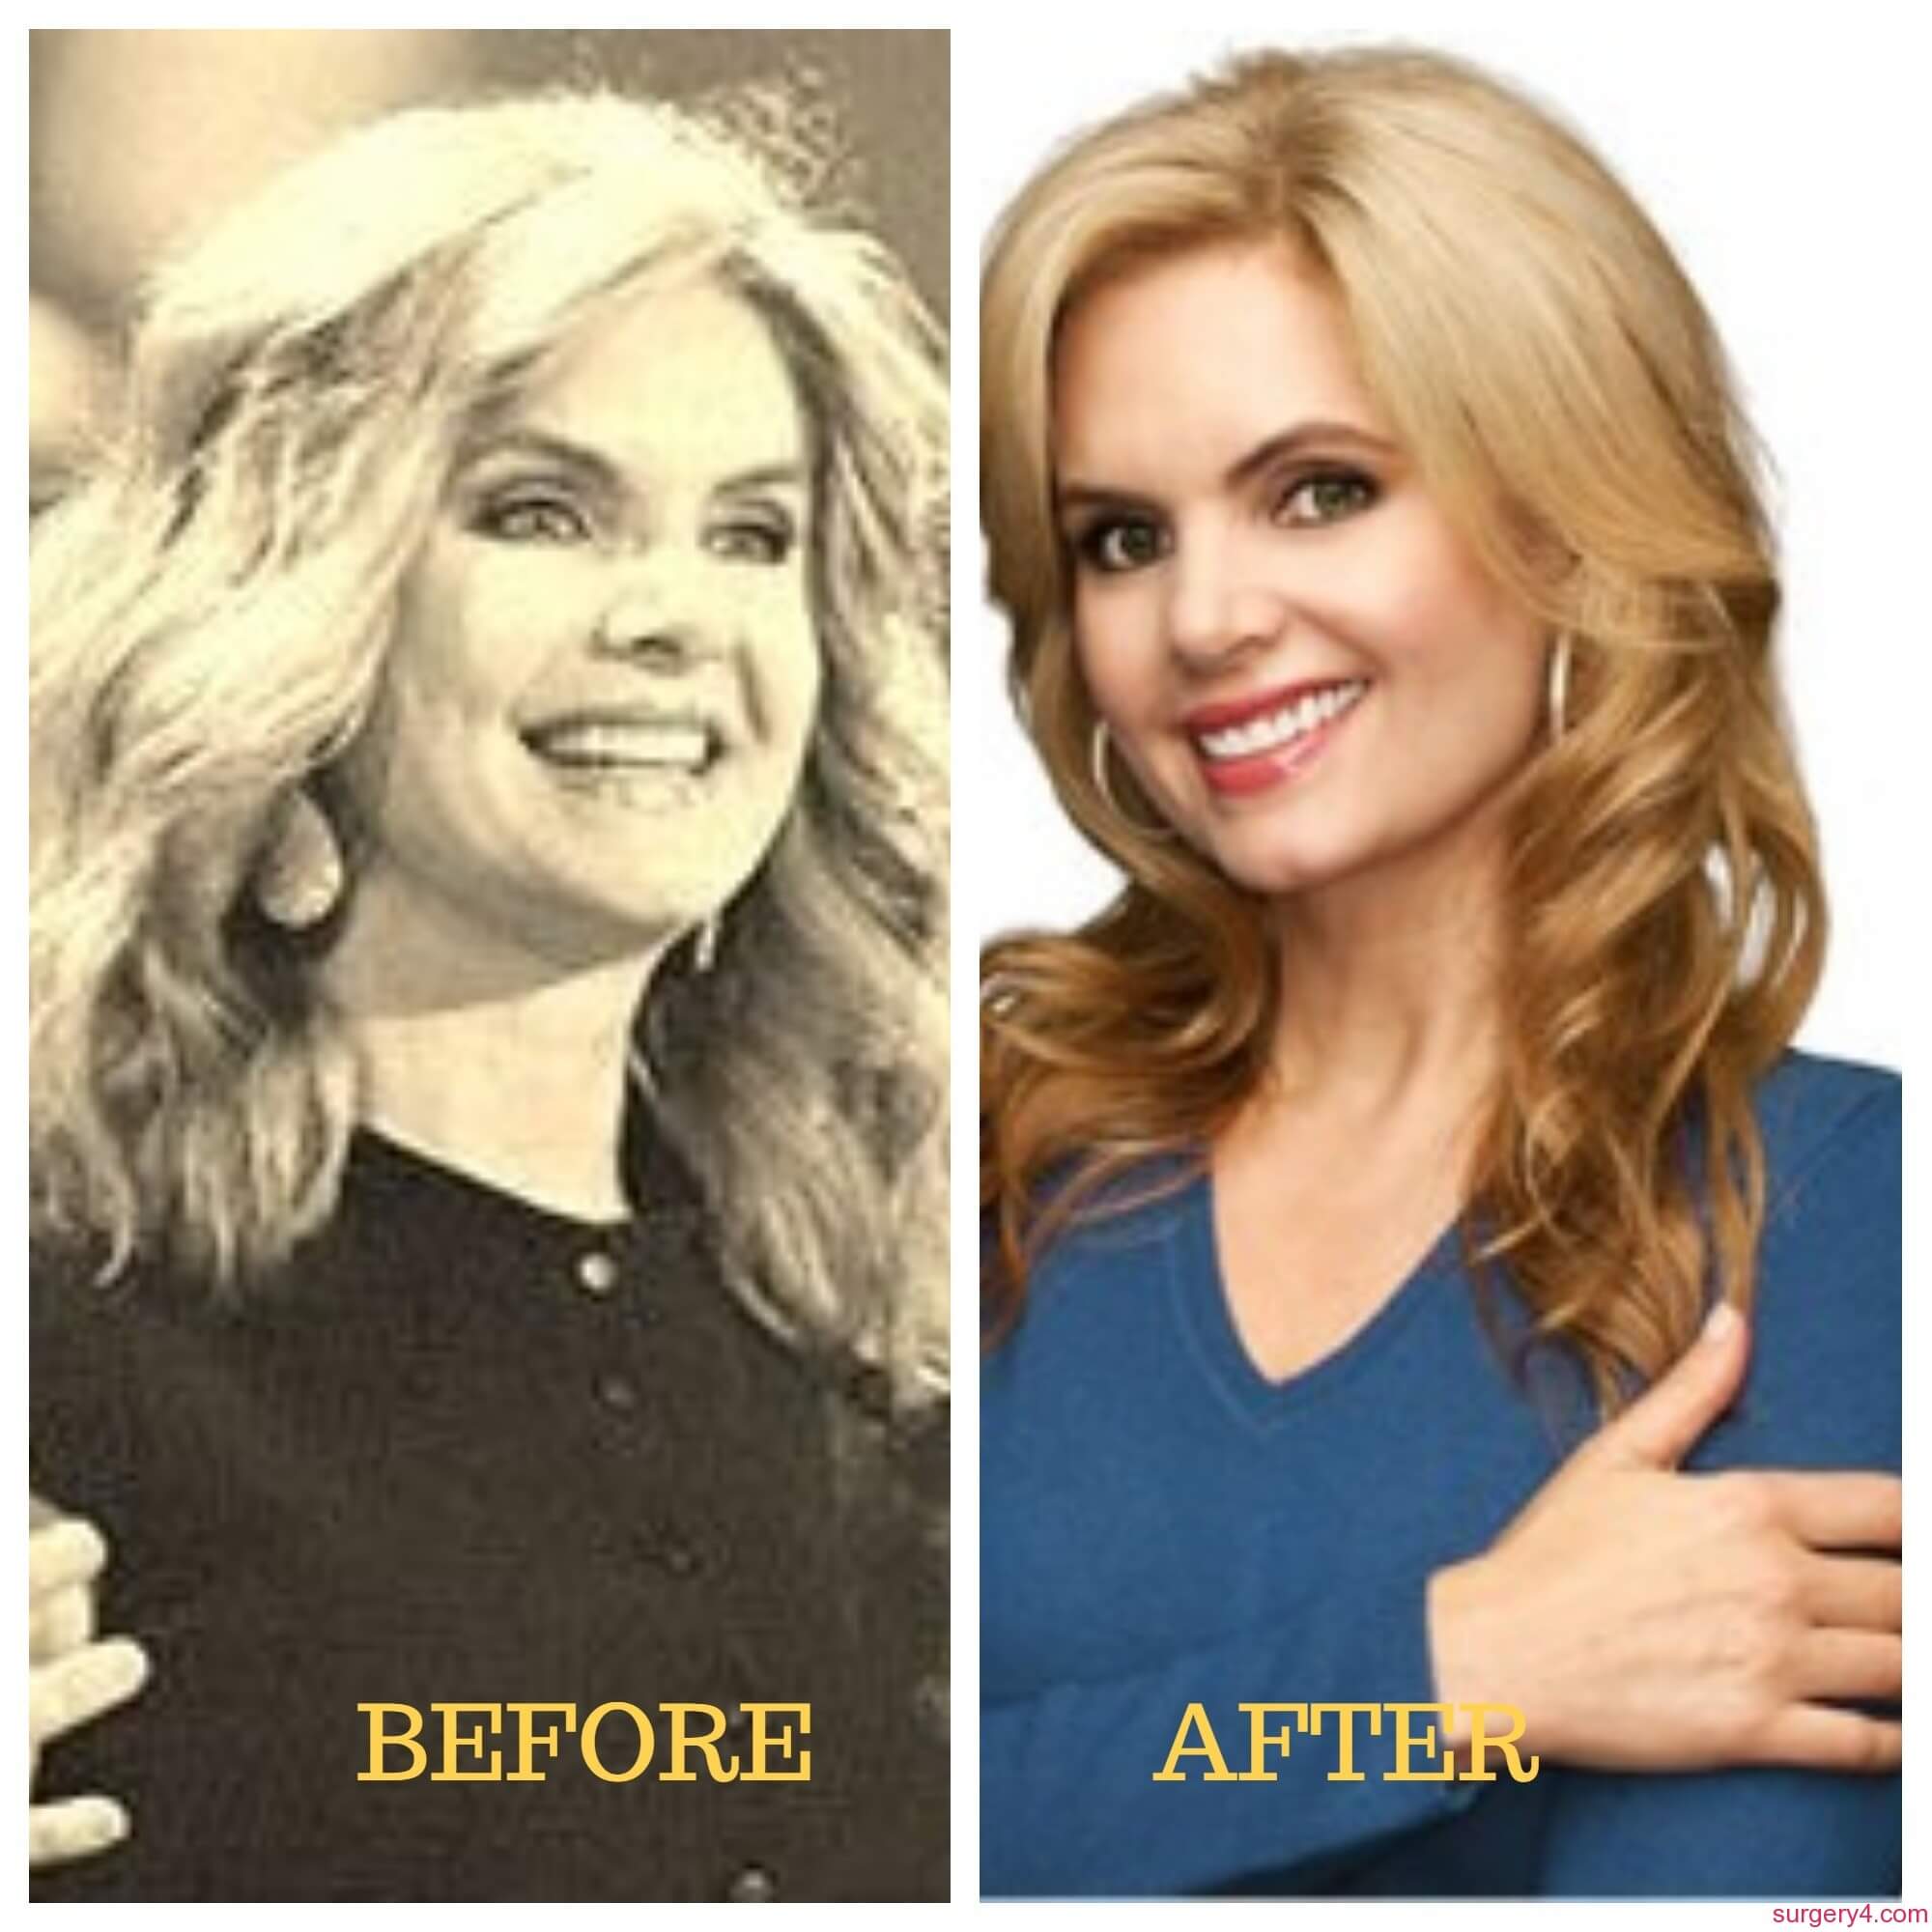 Victoria Osteen Plastic Surgery Photos [Before & After] ⋆